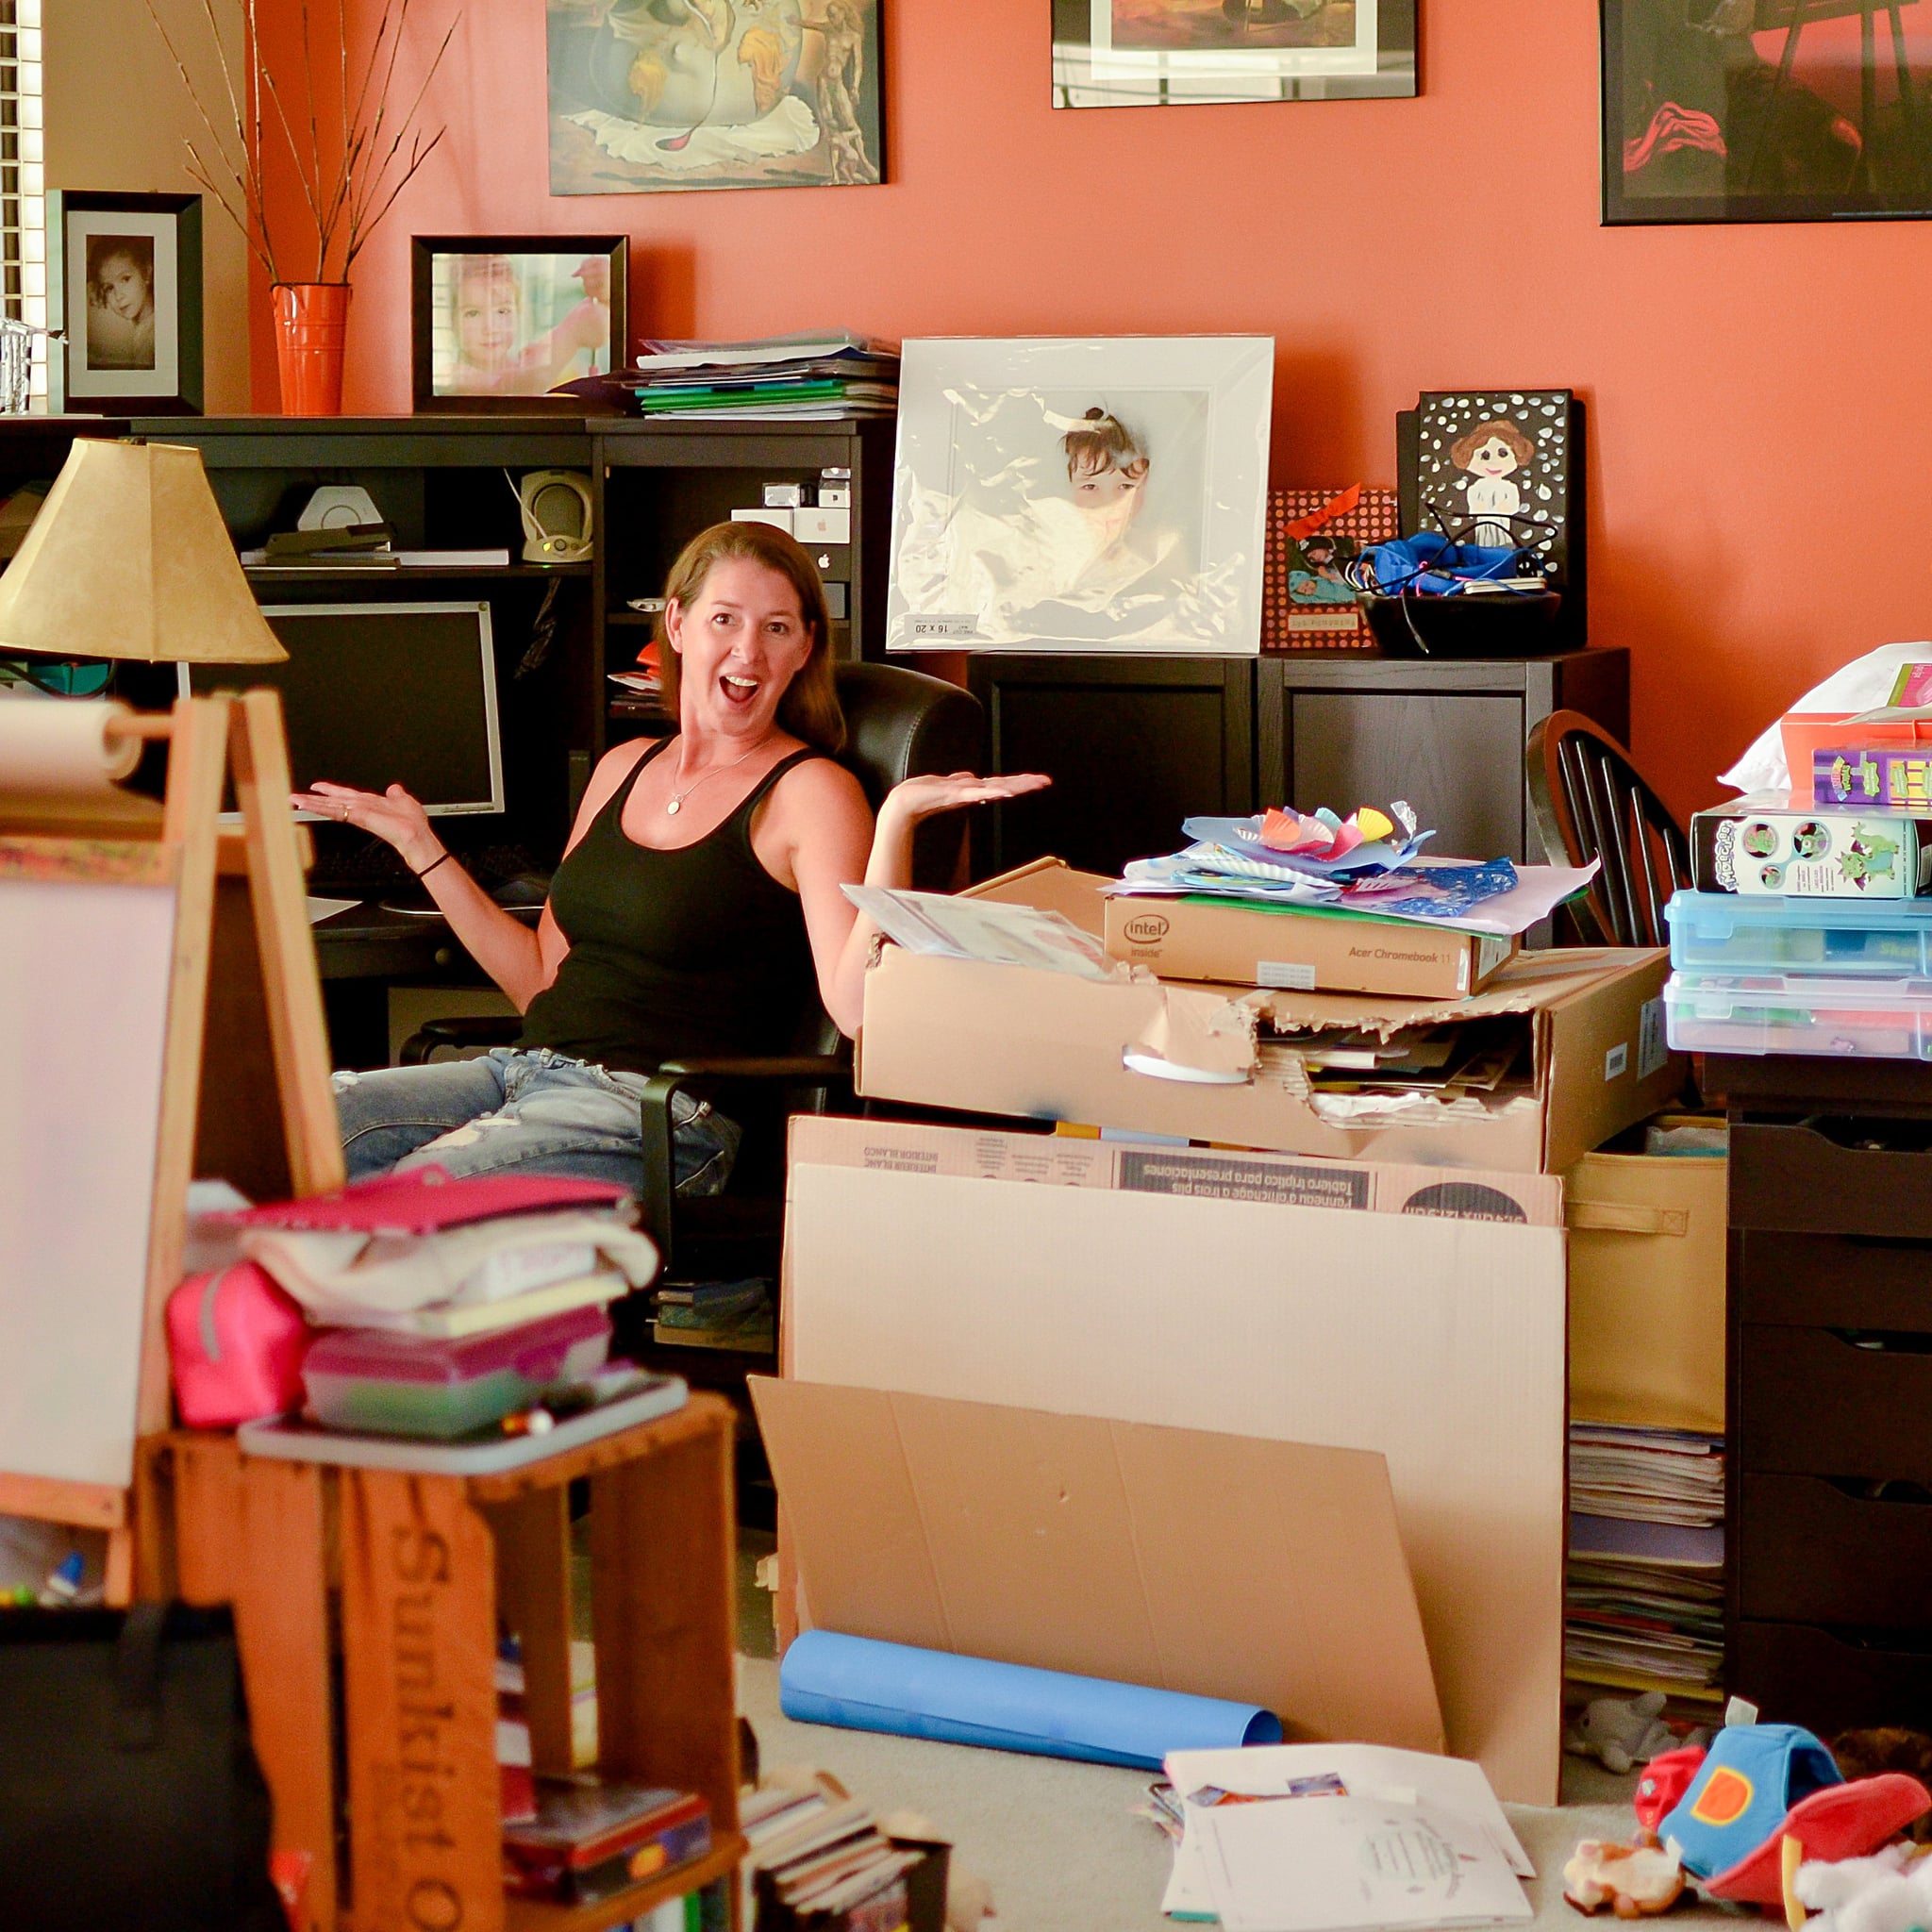 Photos Of Messy Houses With Kids Popsugar Family